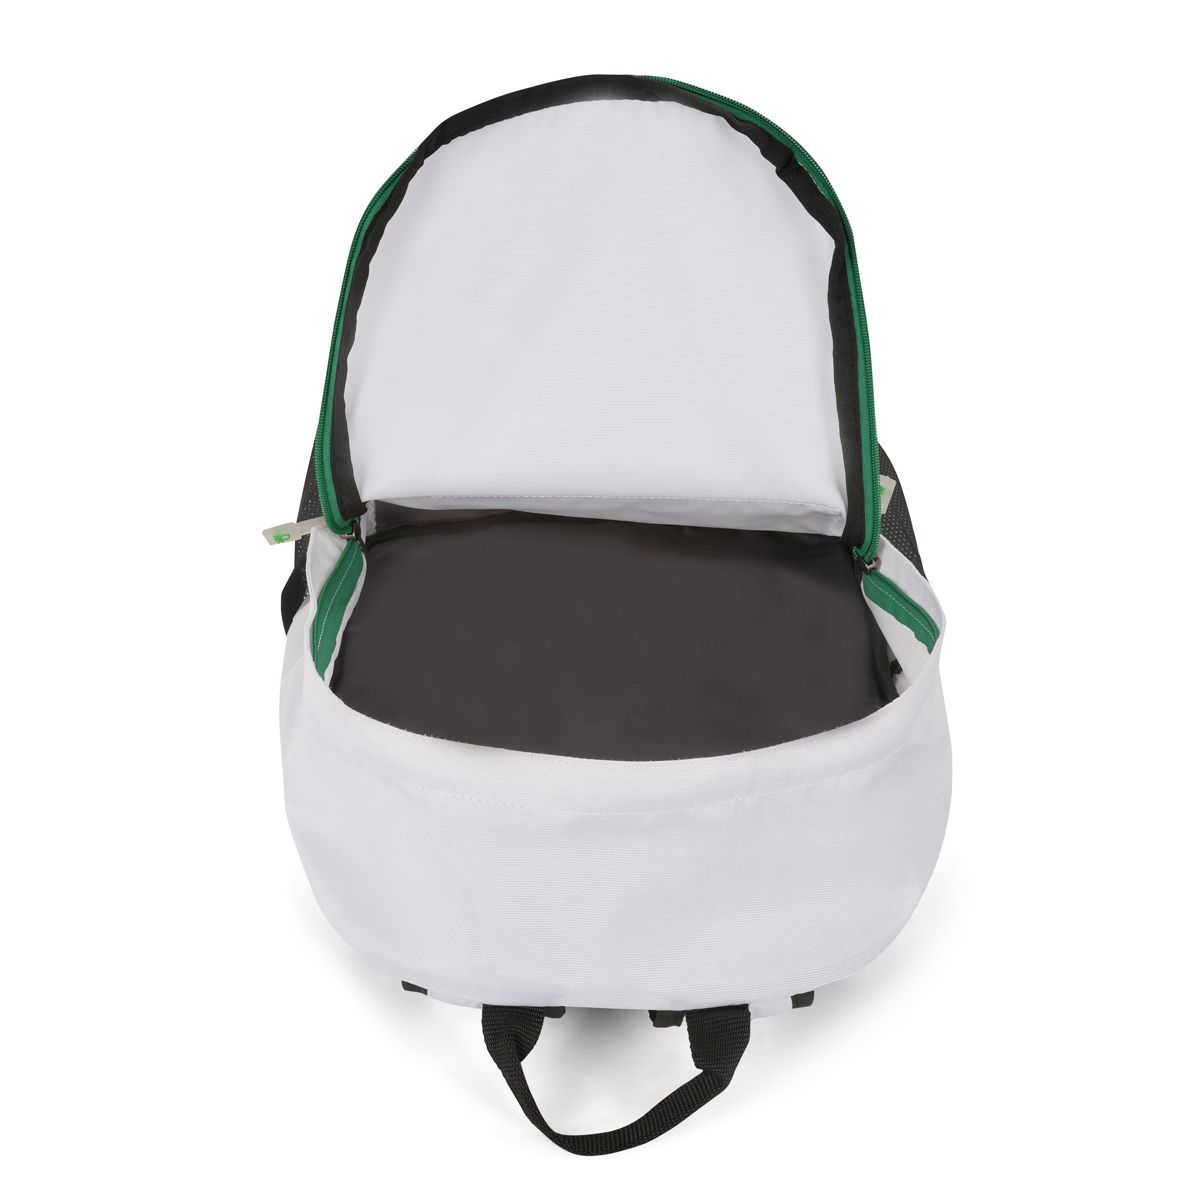 United Colors of Benetton Willow Laptop Backpack White